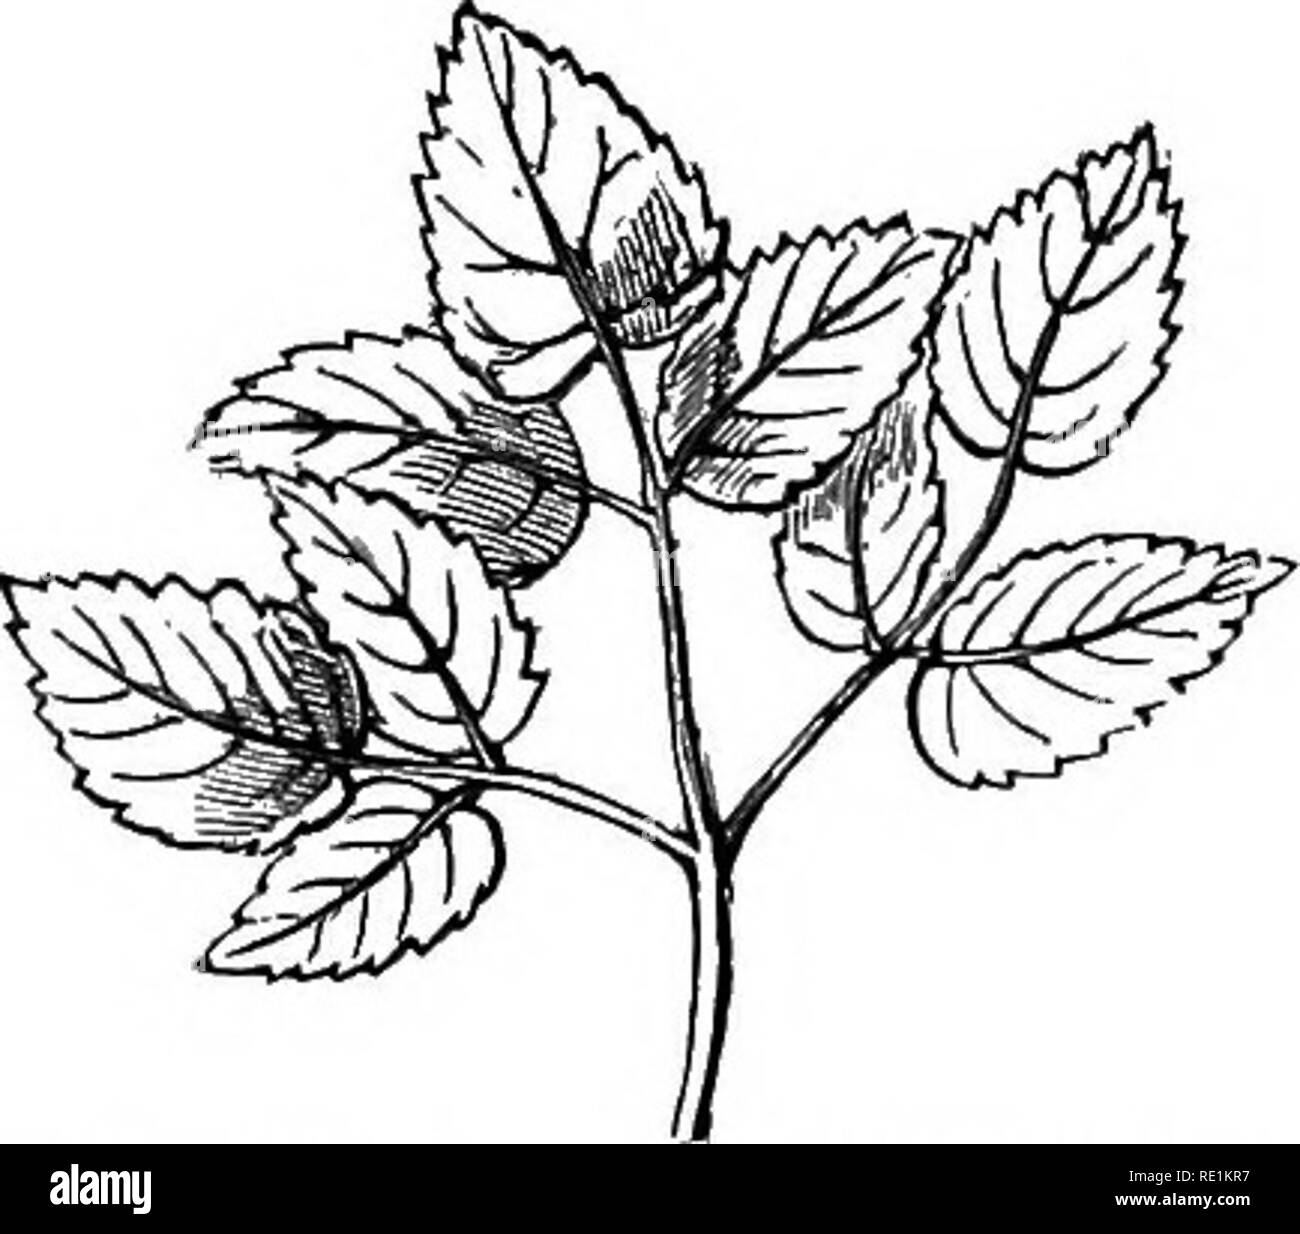 . A manual of botany. Botany. Fig. 159.. Fig. 153. A binate or bifoliate leaf. Fig. 154. Ternate or triloliate leaf. Fig. 155. Quadrifoliate leaf of Marsilea quadrifolia. Fig.5^. Quinate or quinquefoliate leaf. Fig. 157. Septenate leaf of the Horsechestnut {.^sculfs Hippocastanum). Fig. 158. Mnltifoliate leaf of a Lupin. Fig. 159. A biternate leaf. leaflets are less deeply divided, as in fig. 97. Il the division extends beyond this, the leaf is decompound {fig. 101), as in many Umbelliferous plants.. Please note that these images are extracted from scanned page images that may have been digit Stock Photo